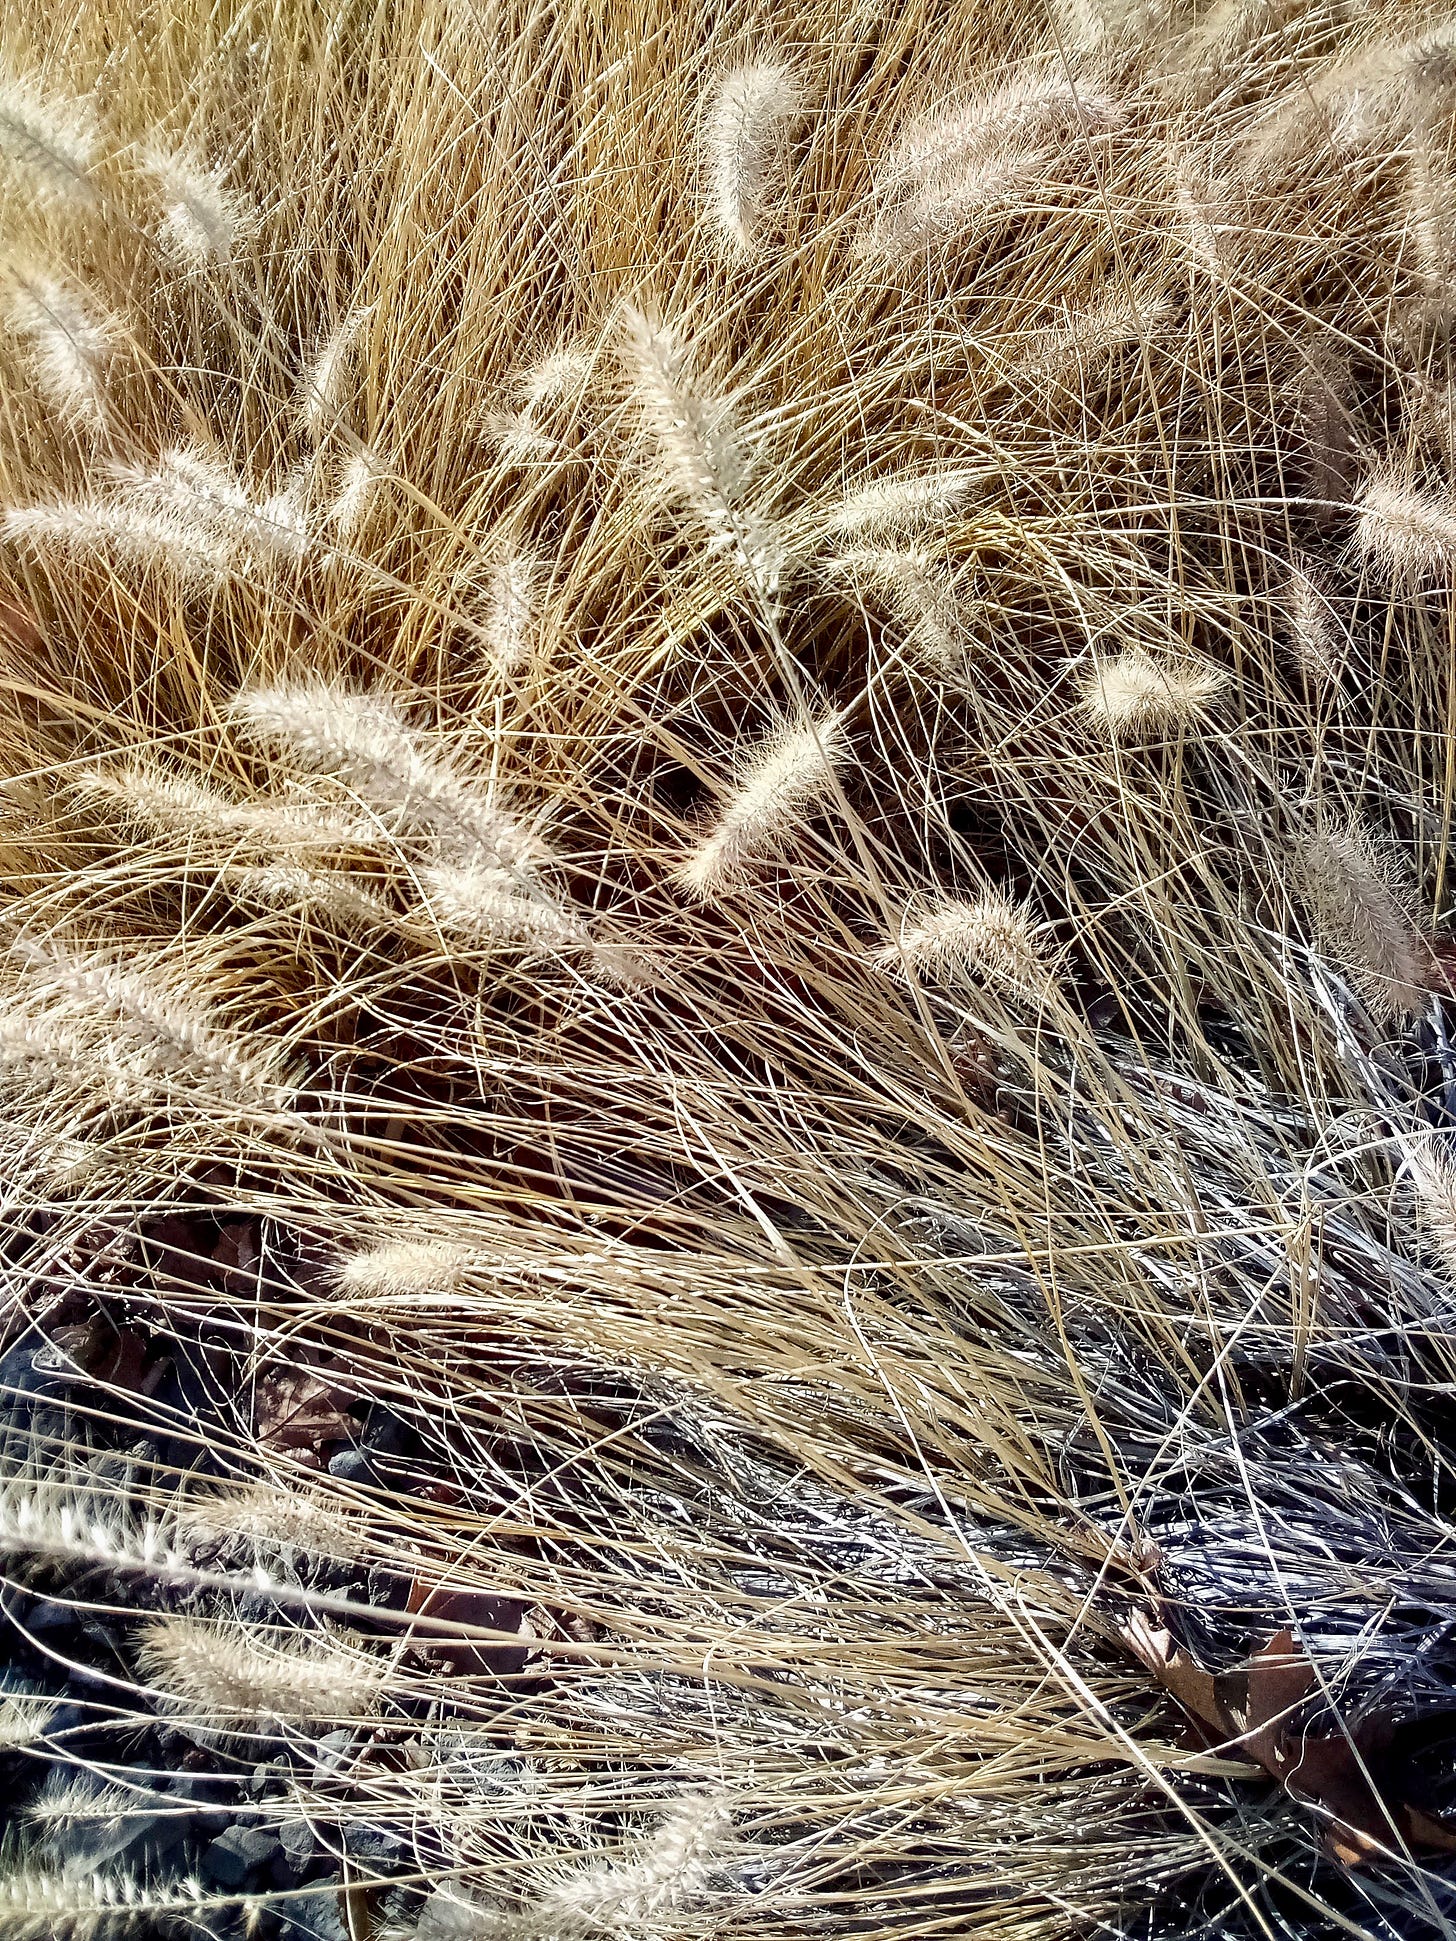 Grass seed heads backlit by sunshine